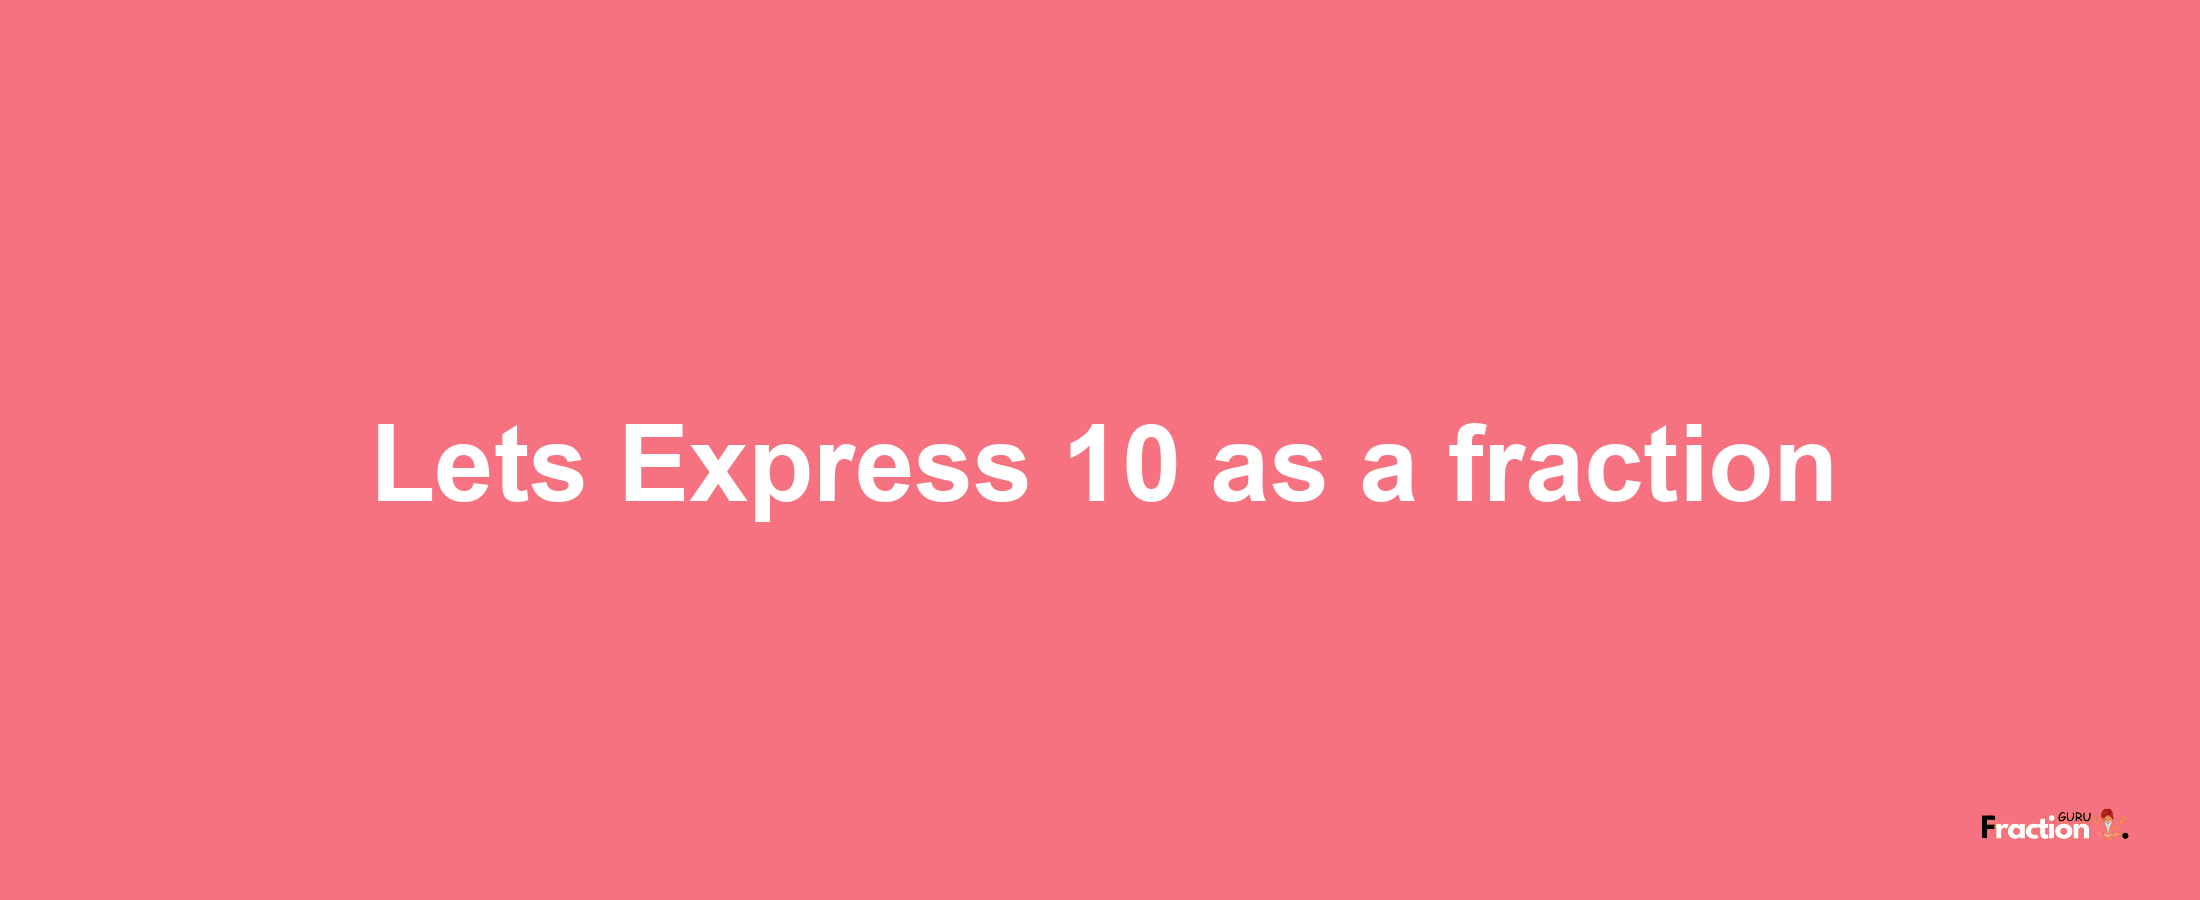 Lets Express 10 as afraction